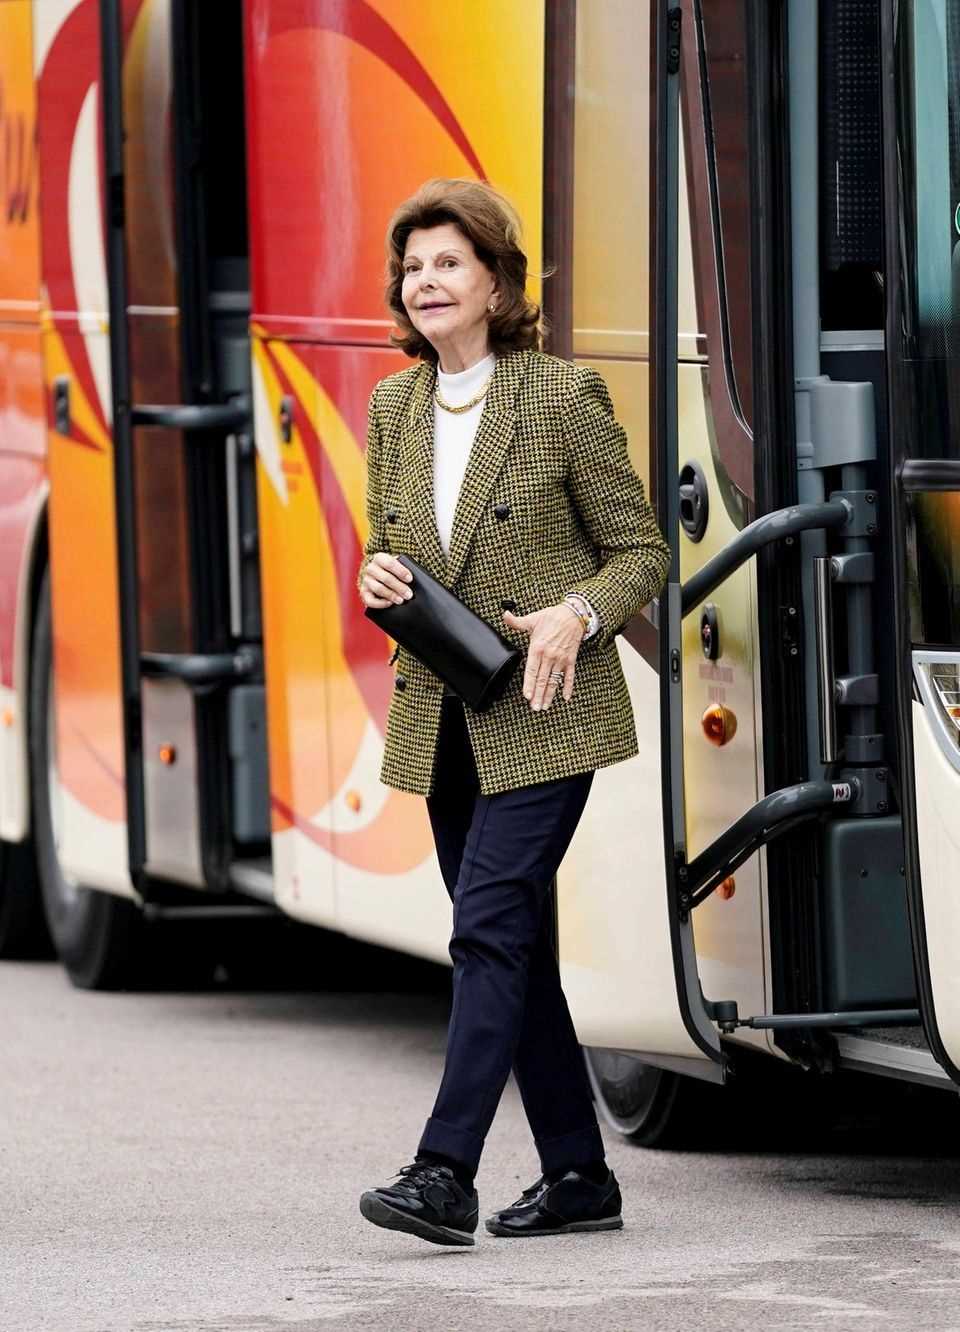 Queen Silvia: This look makes her look years younger